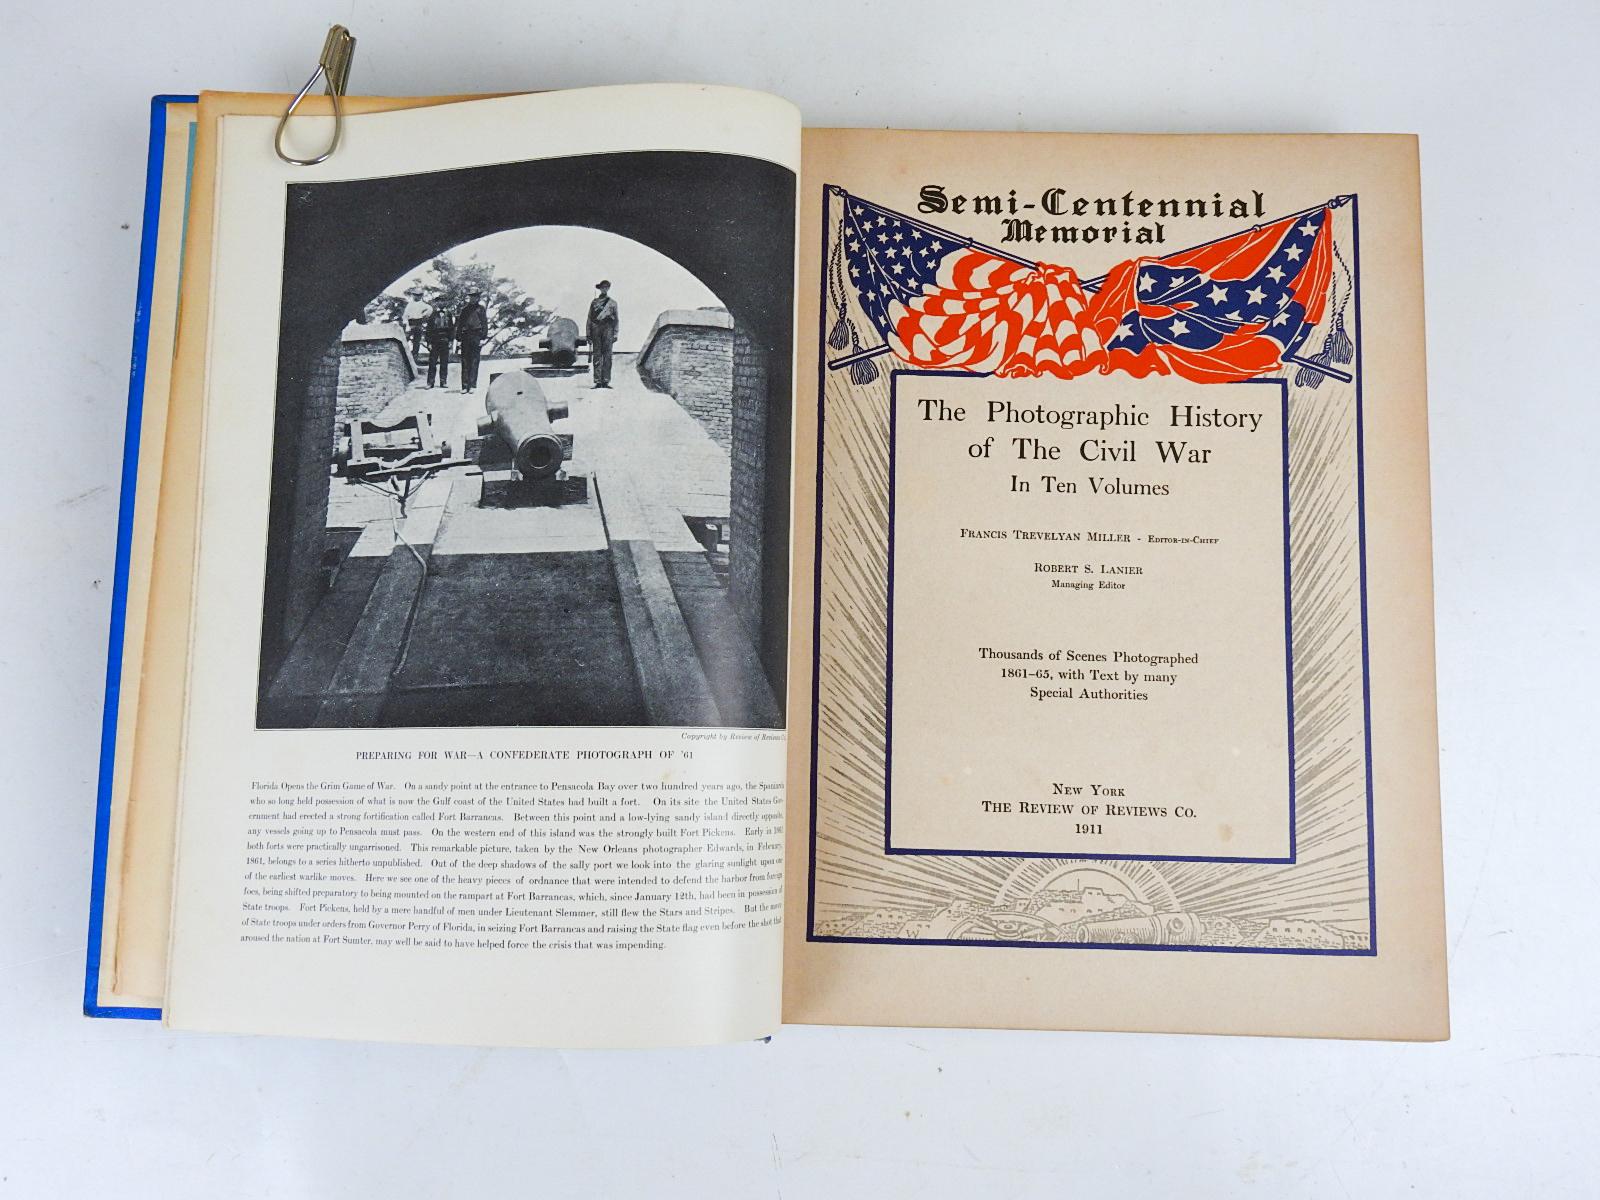 American 1911 Photographic History of the Civil War Books - Set of 10 For Sale